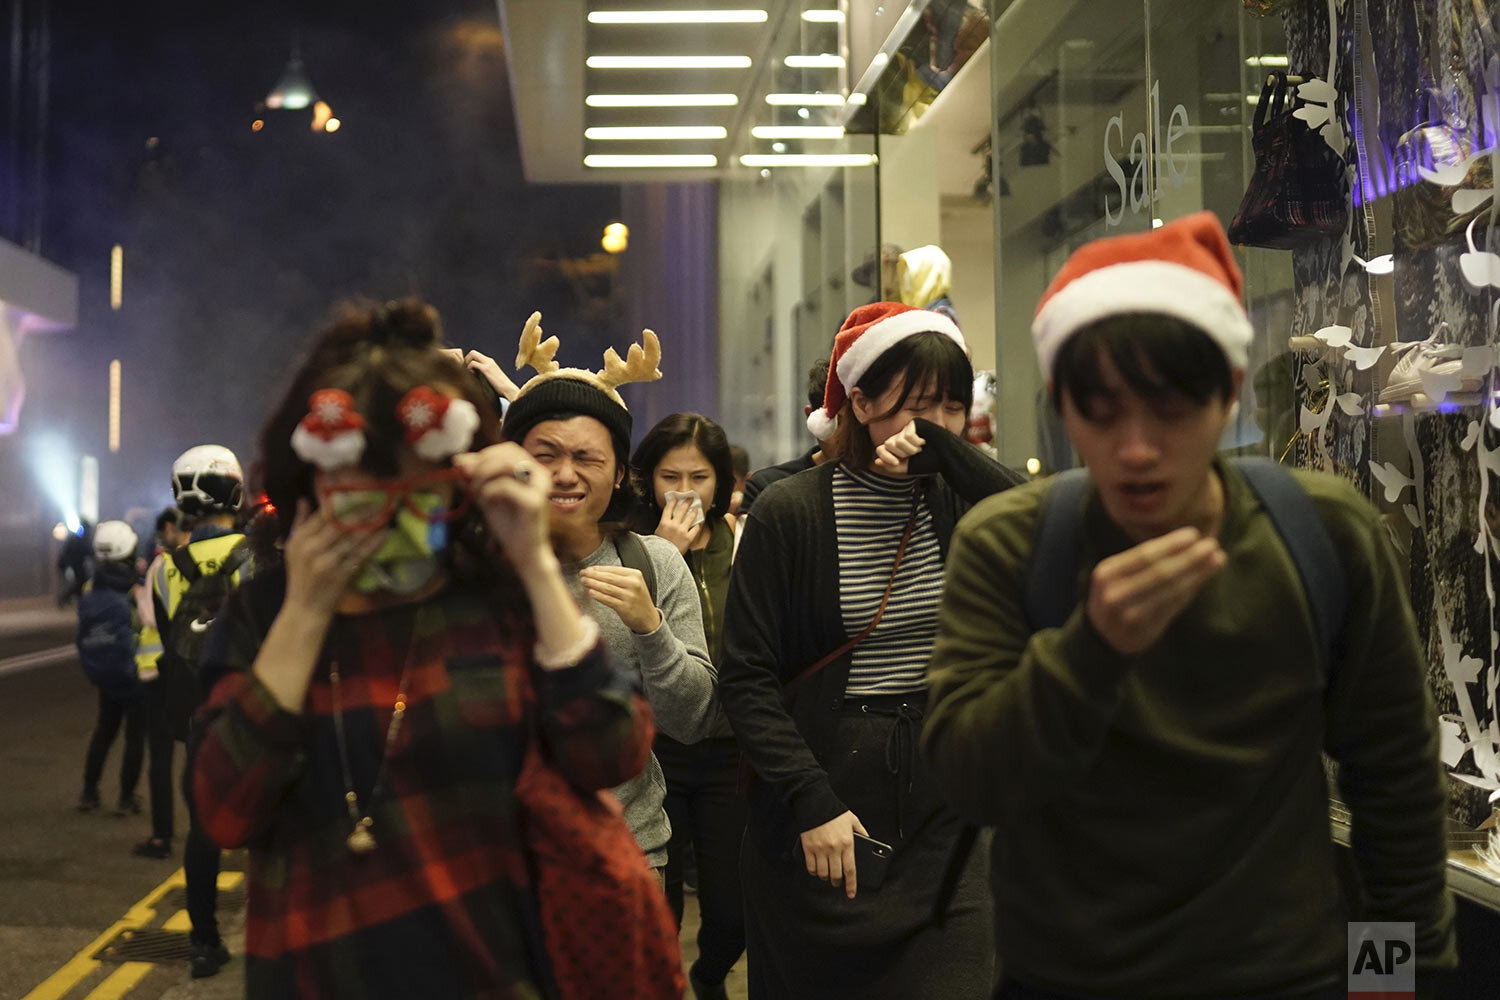  Residents dressed for Christmas festivities react to tear gas as police confront protesters on Christmas Eve in Hong Kong on Tuesday, Dec. 24, 2019. (AP Photo/Kin Cheung) 